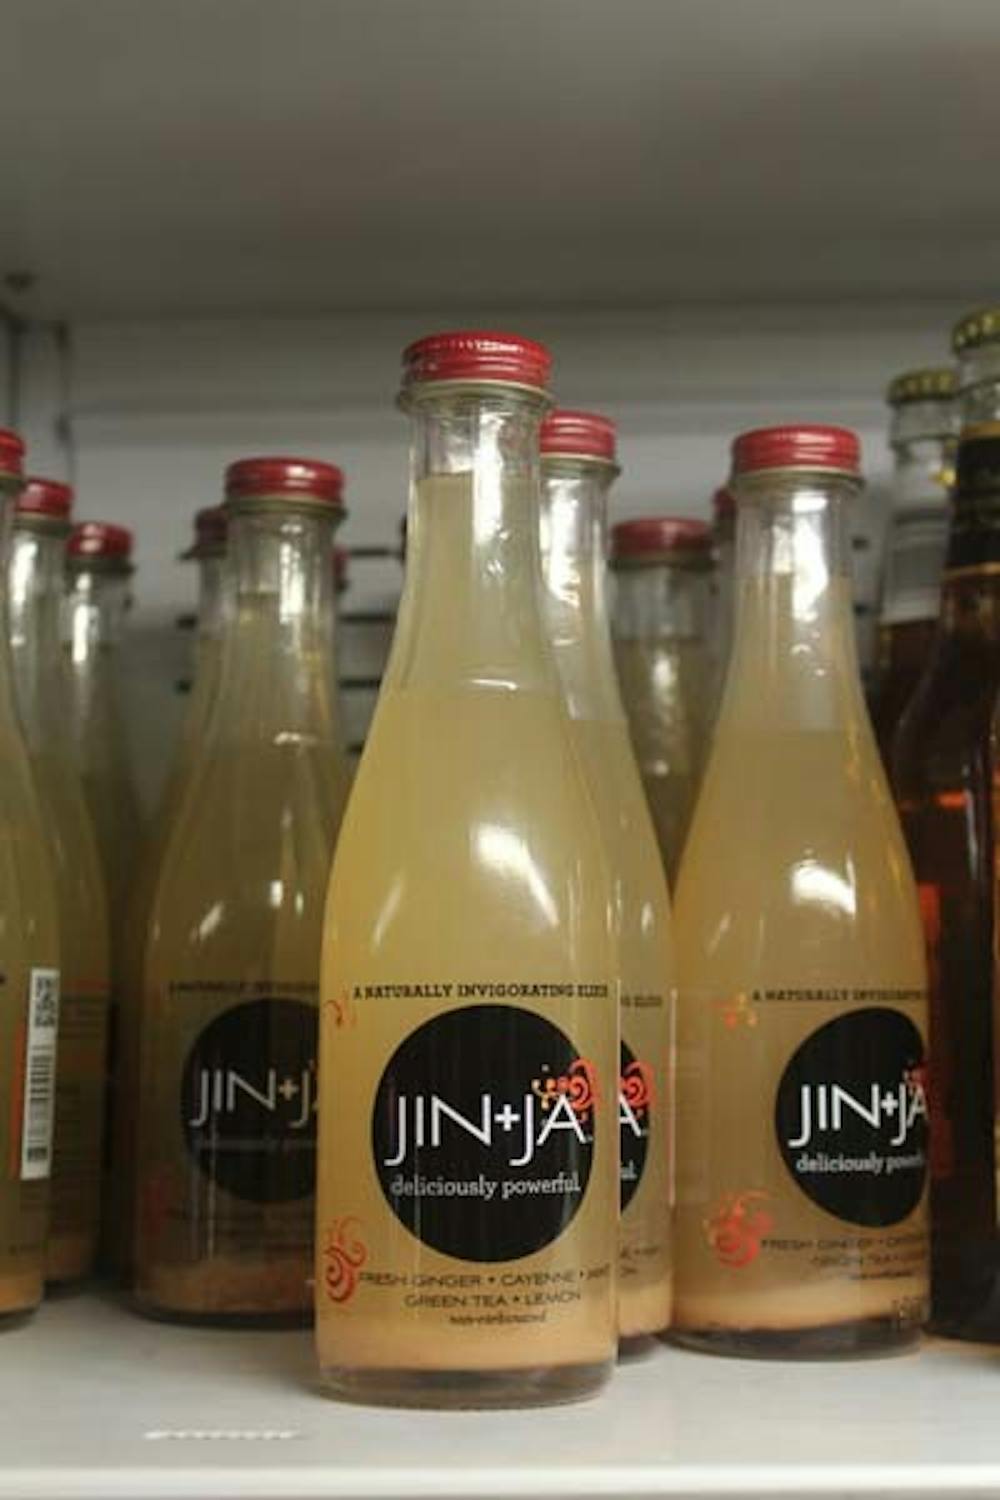 	Places like Houston Market, 1920 Commons Retail and Joe’s Coffee now offer new food options created by Wharton MBA graduates. One company sells cookies and the other company sells a unique drink called Jin and Ja. Both food startup companies were started by 2013 Wharton graduates. 